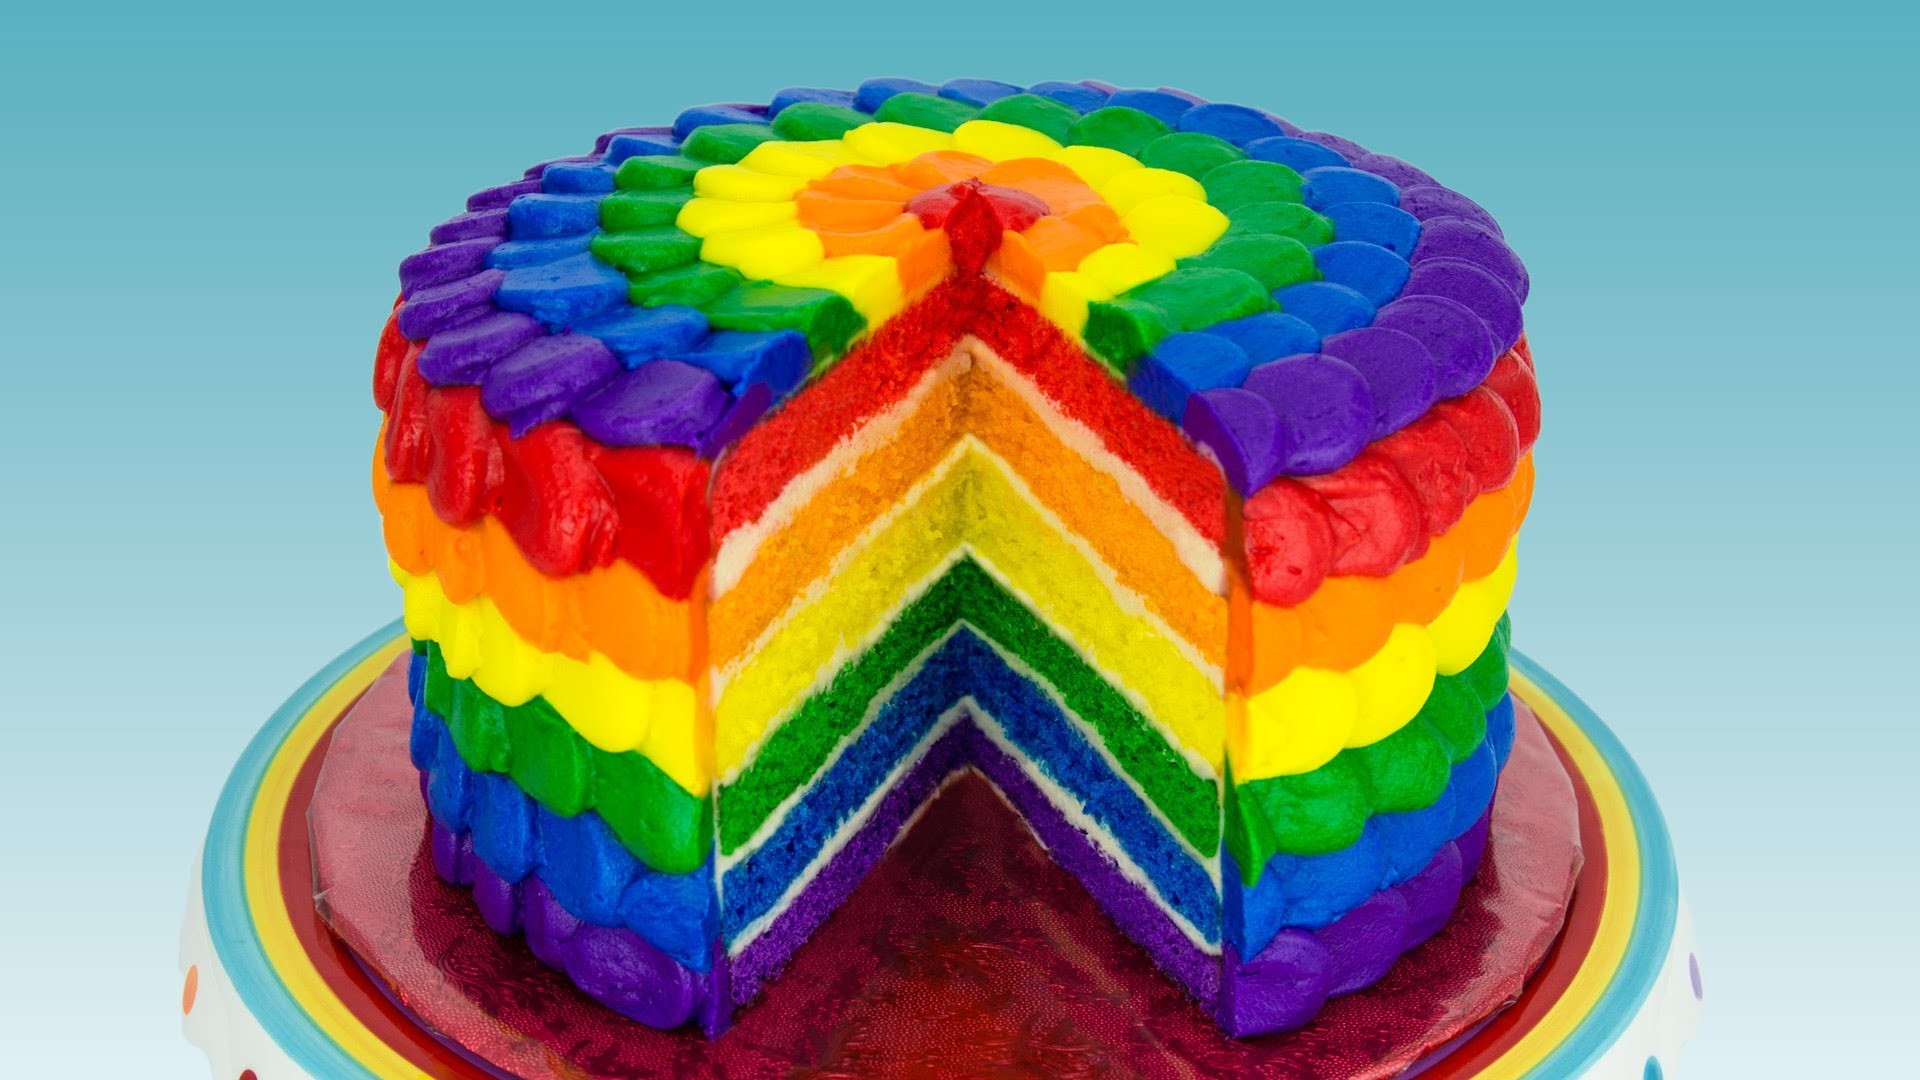 1920x1080 The gayest cake ever?